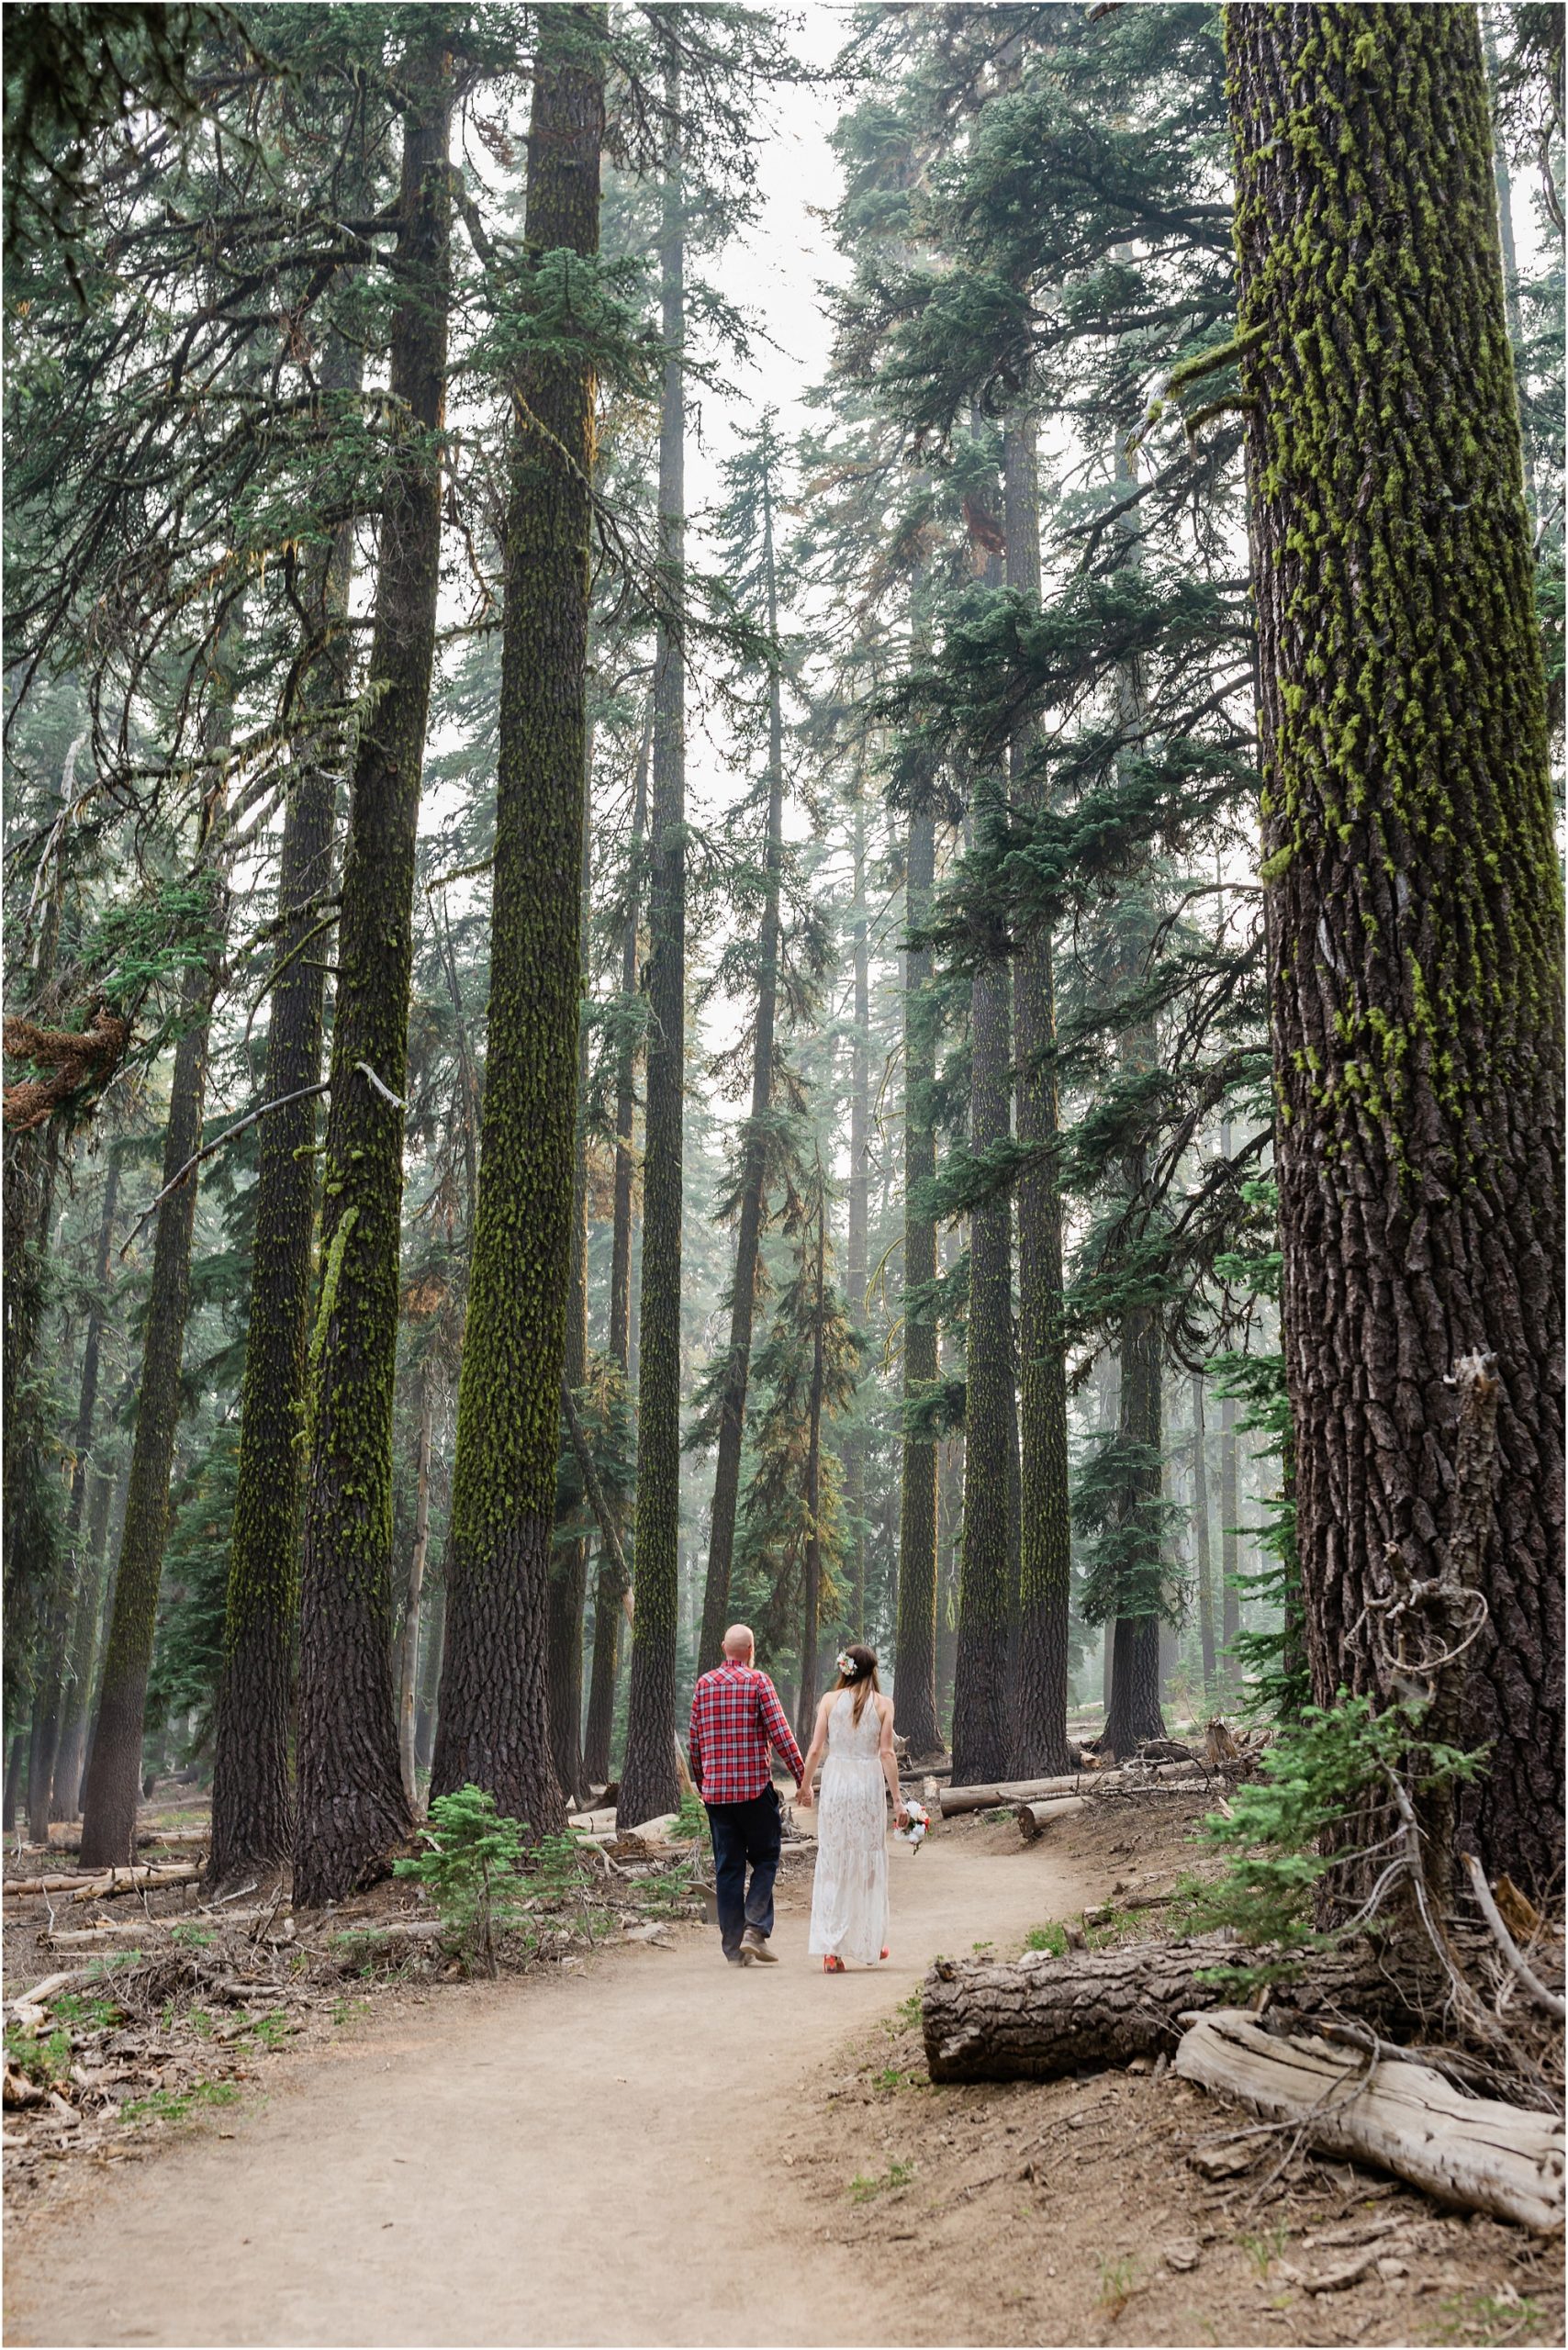 Tall fir trees with soft light filter through onto the hiking trail as a wedding couple walks along hand in hand after their Crater Lake elopement. | Erica Swantek Photography